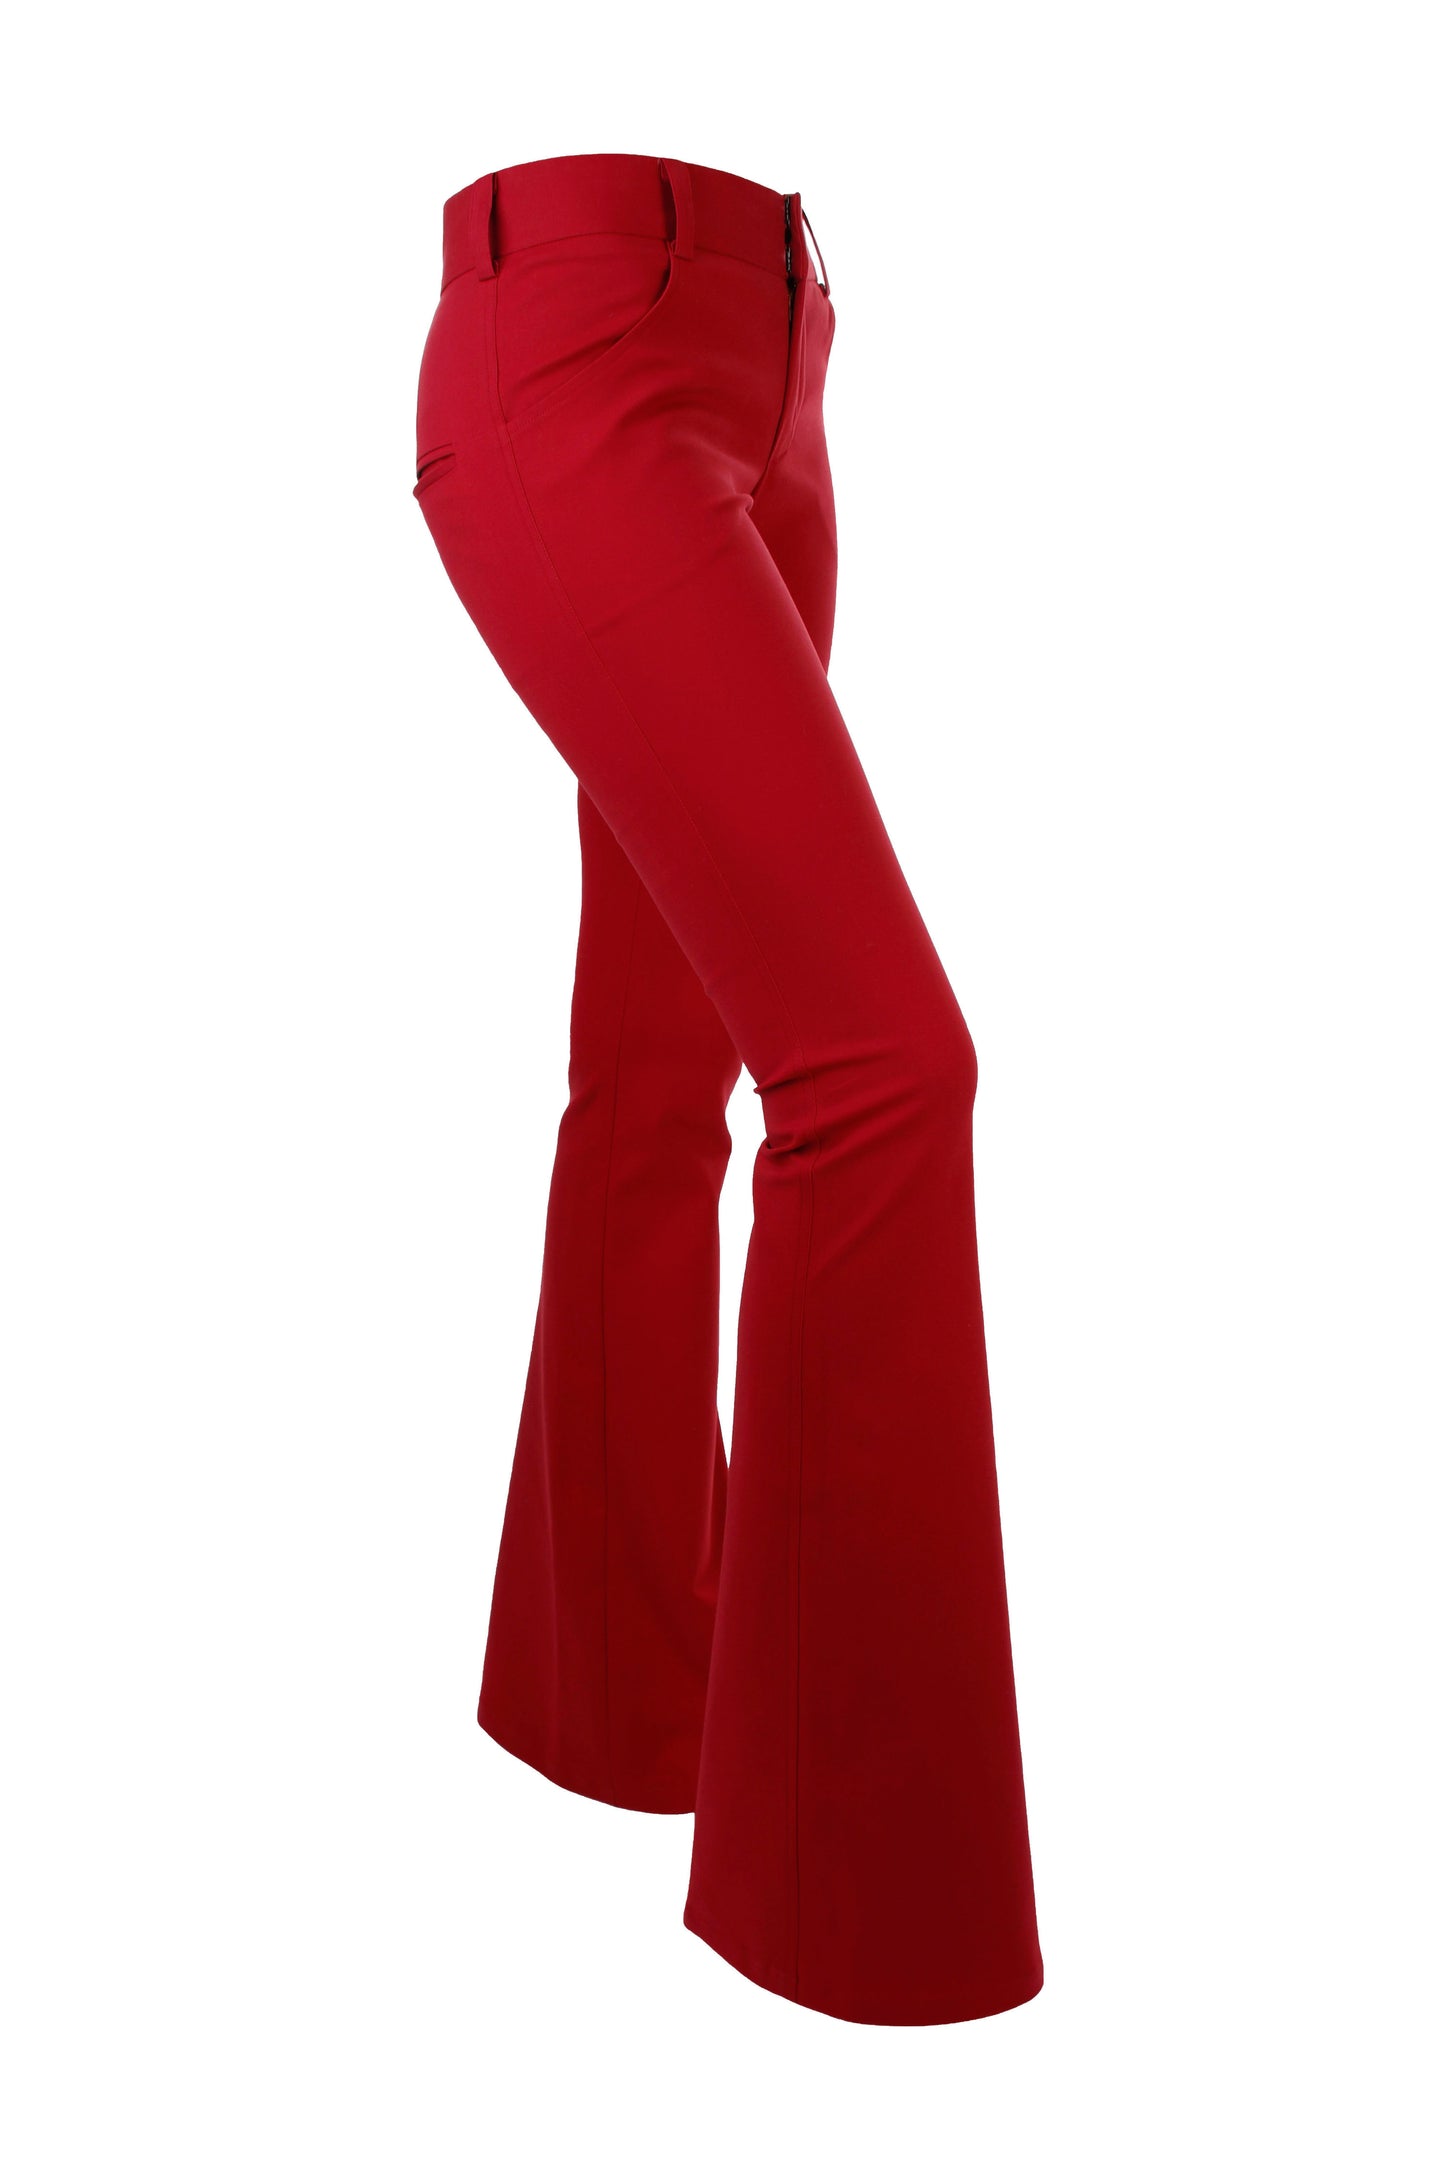 MUCINA BELL BOTTOM RED COTTON PANTS